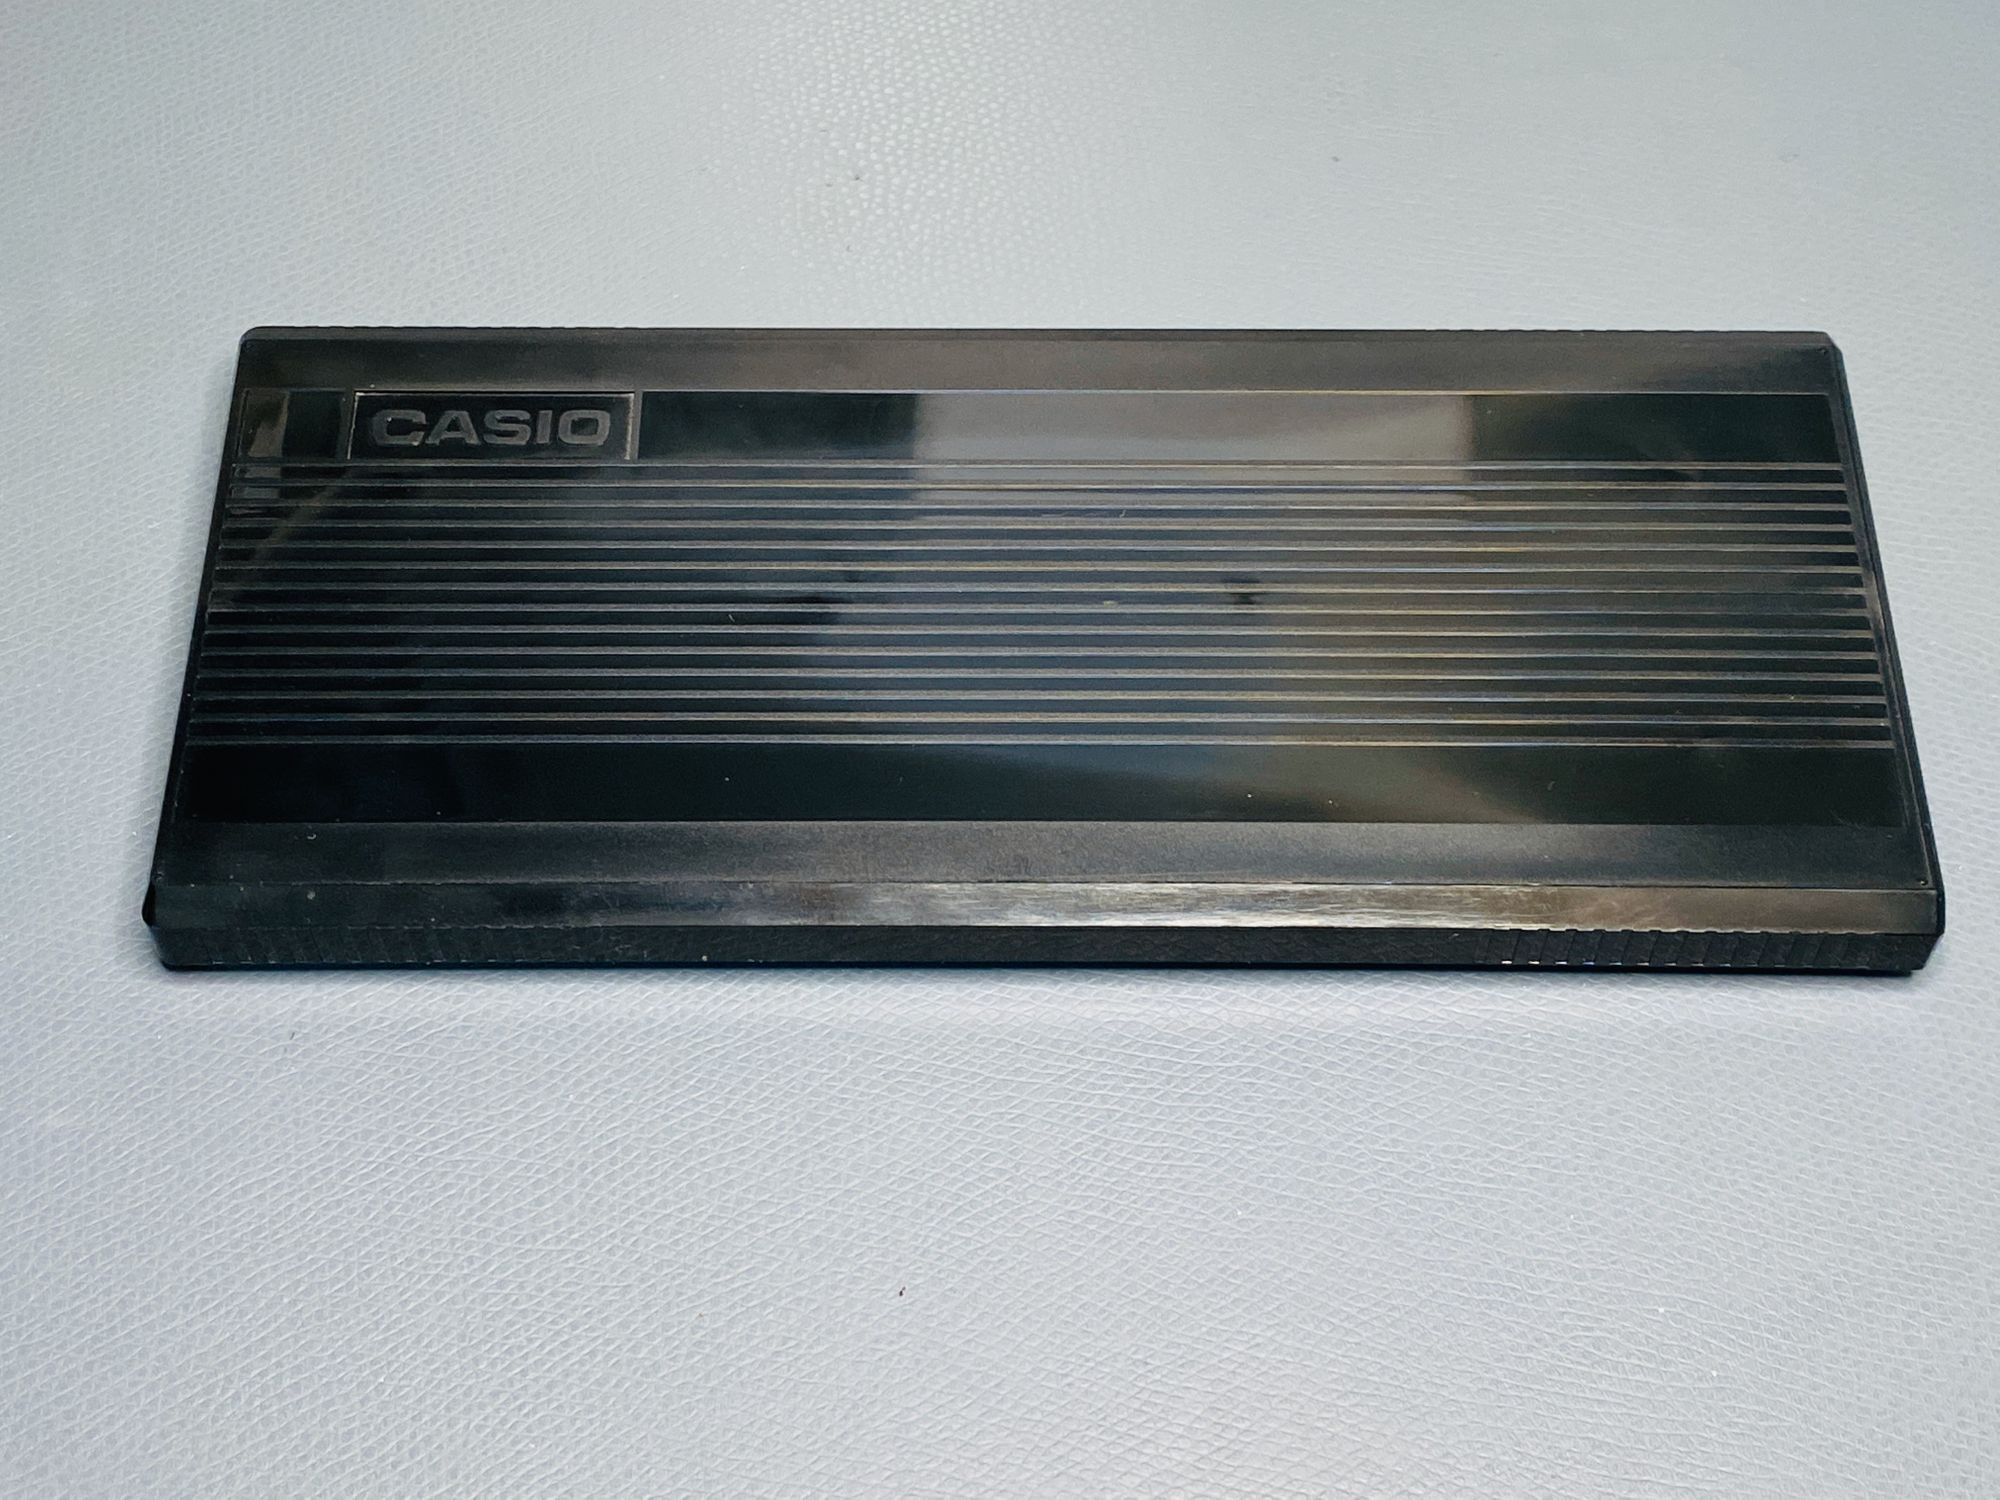 The FX-880P encased with a sliding cover.